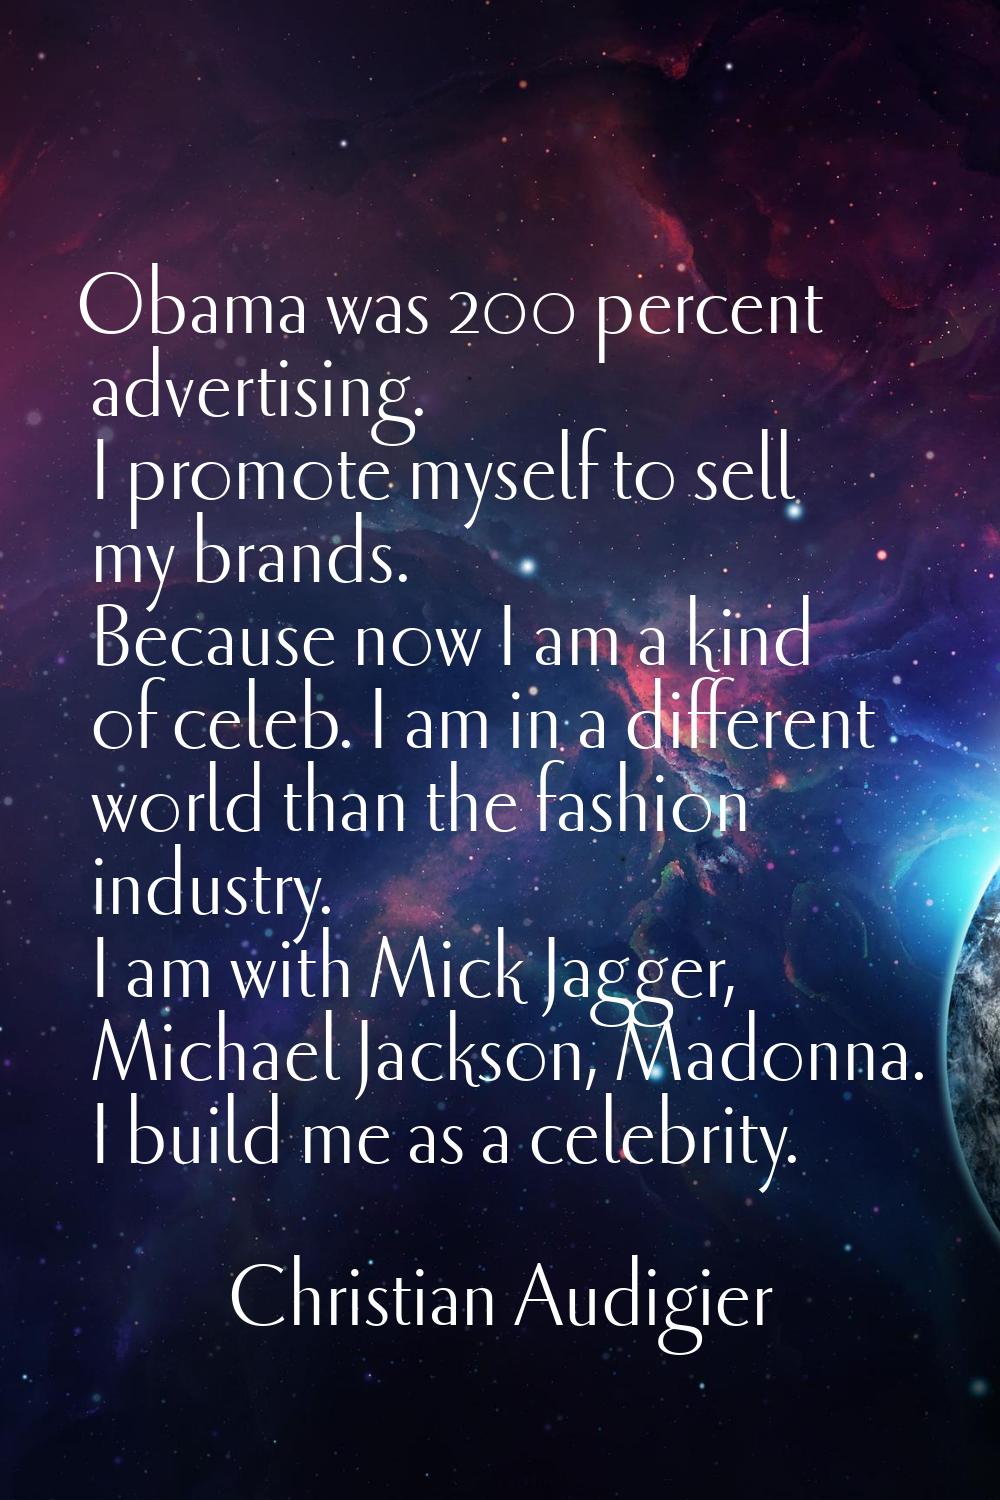 Obama was 200 percent advertising. I promote myself to sell my brands. Because now I am a kind of c